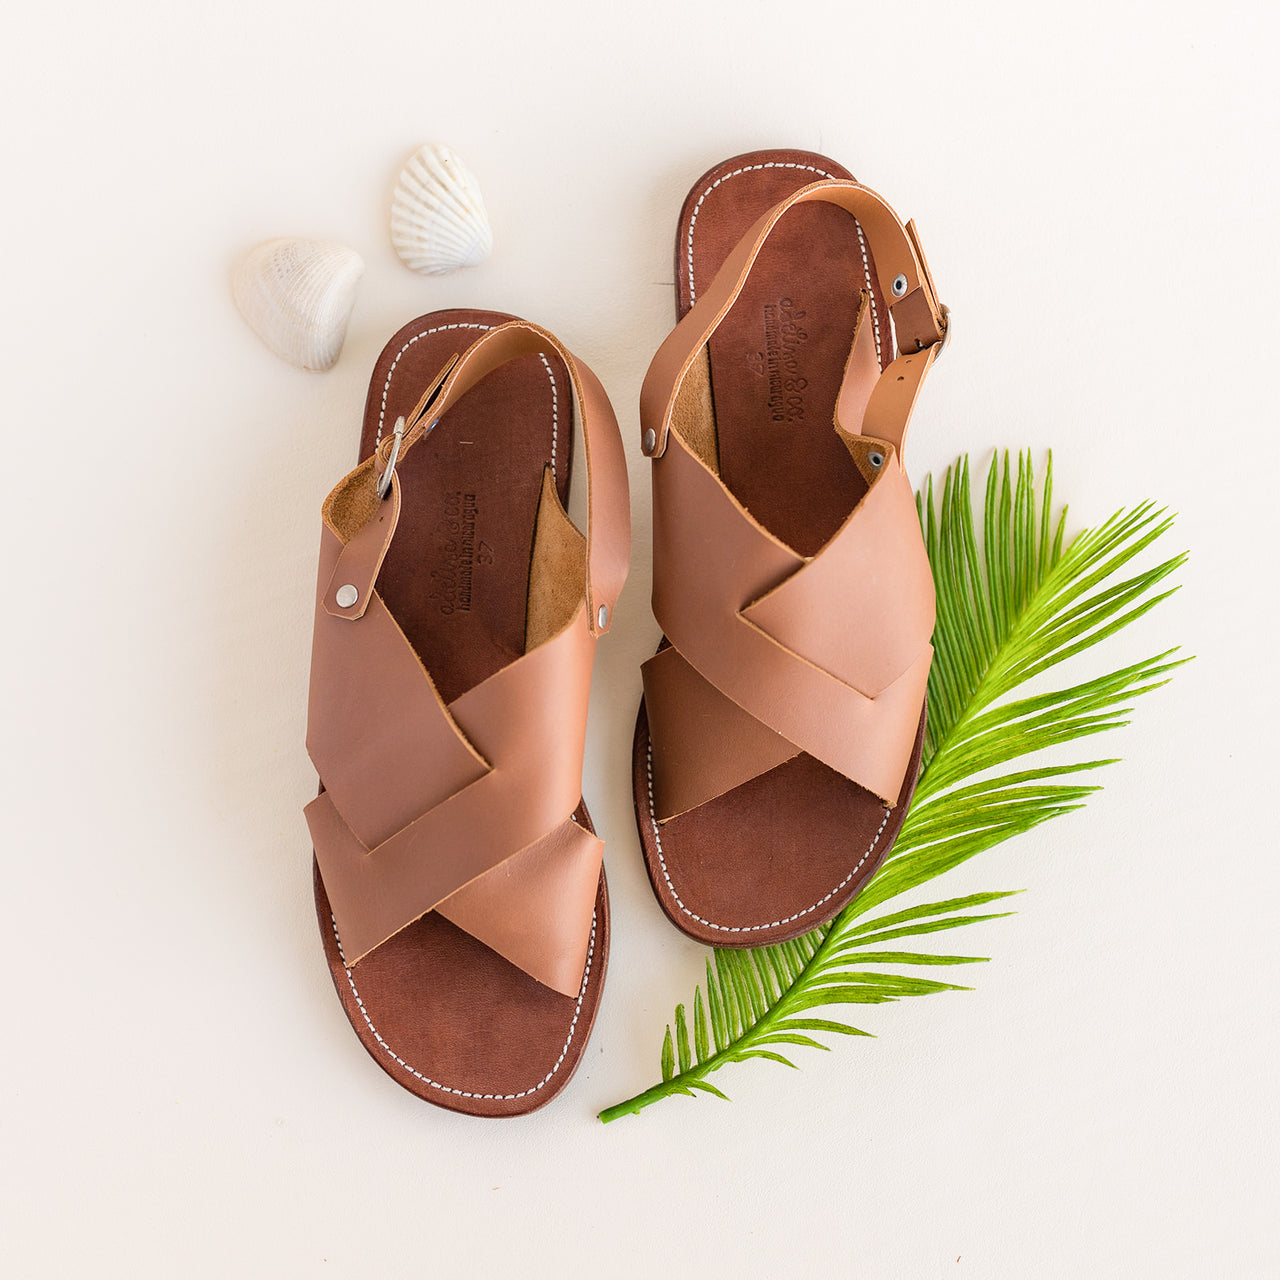 Cross strap, medium brown leather sandals for women.